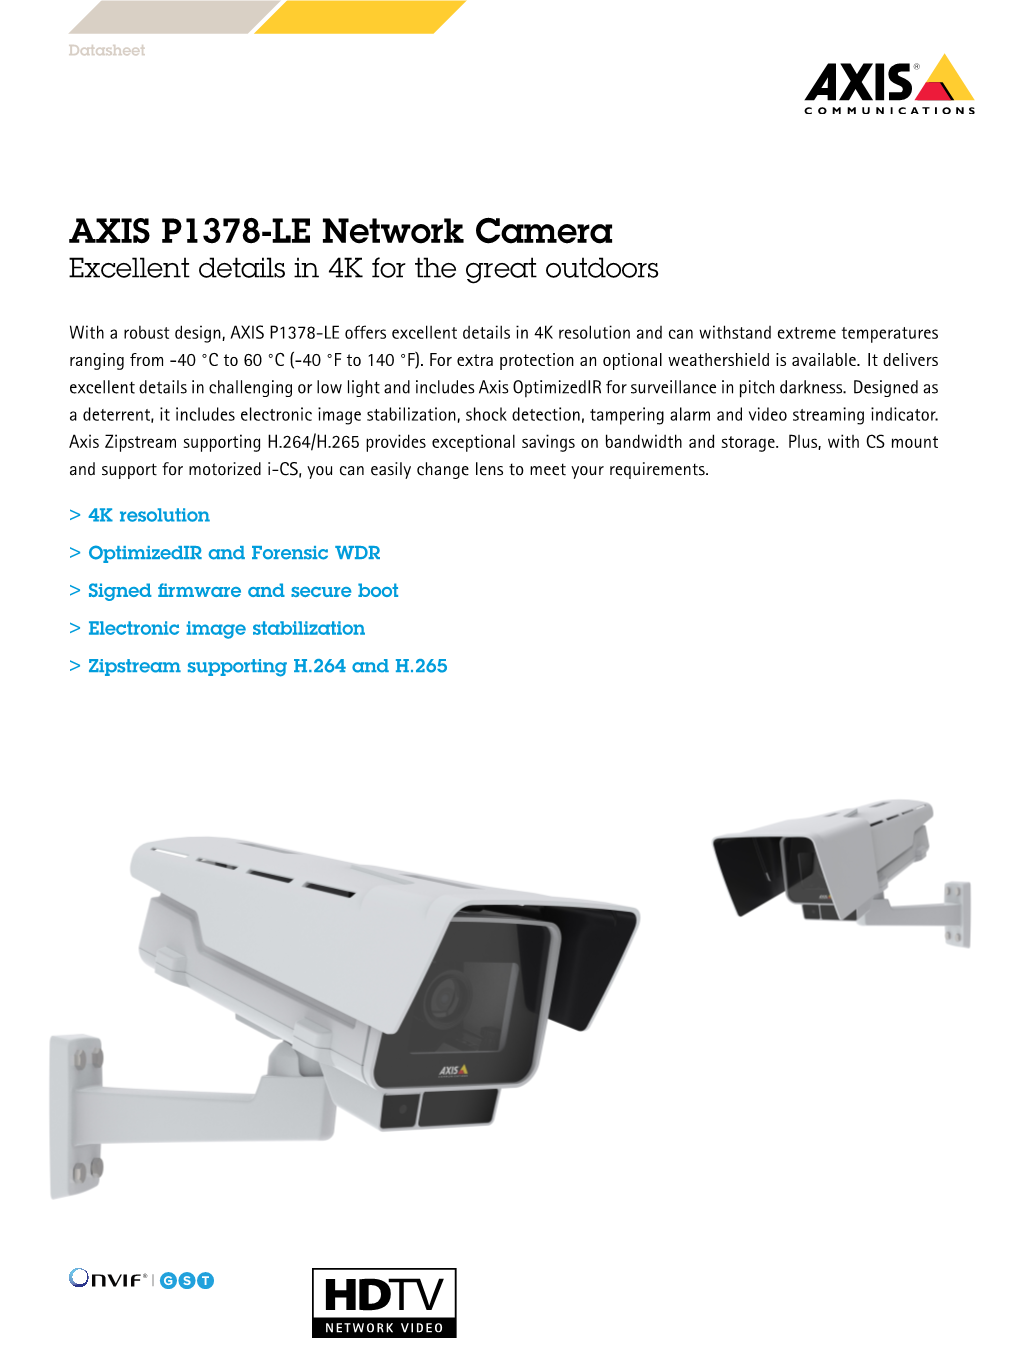 AXIS P1378-LE Network Camera Excellent Details in 4K for the Great Outdoors